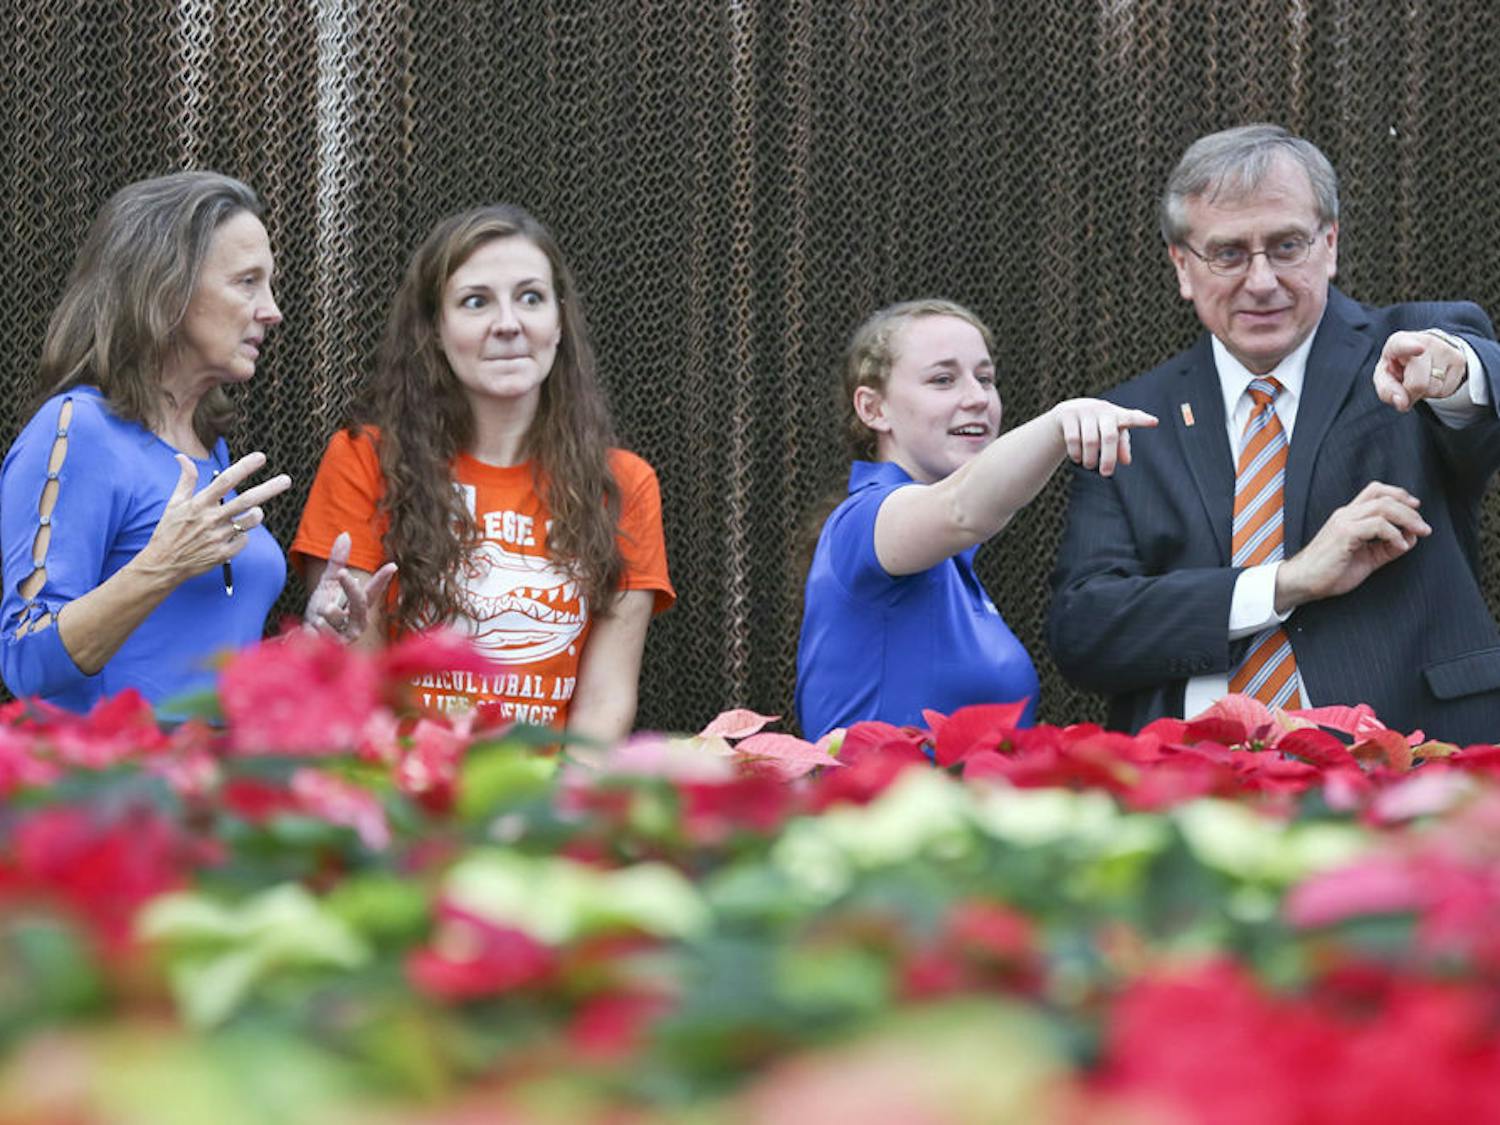 From left to right, UF president’s wife Linda Moskeland Fuchs and 31-year-old UF agriculture and life sciences major Allison Bechtloff talk about the Environmental Horticulture Club while 22-year-old UF plant sciences junior Carly Anderson and UF President Kent Fuchs discuss the variety of poinsettias available at the greenhouse.